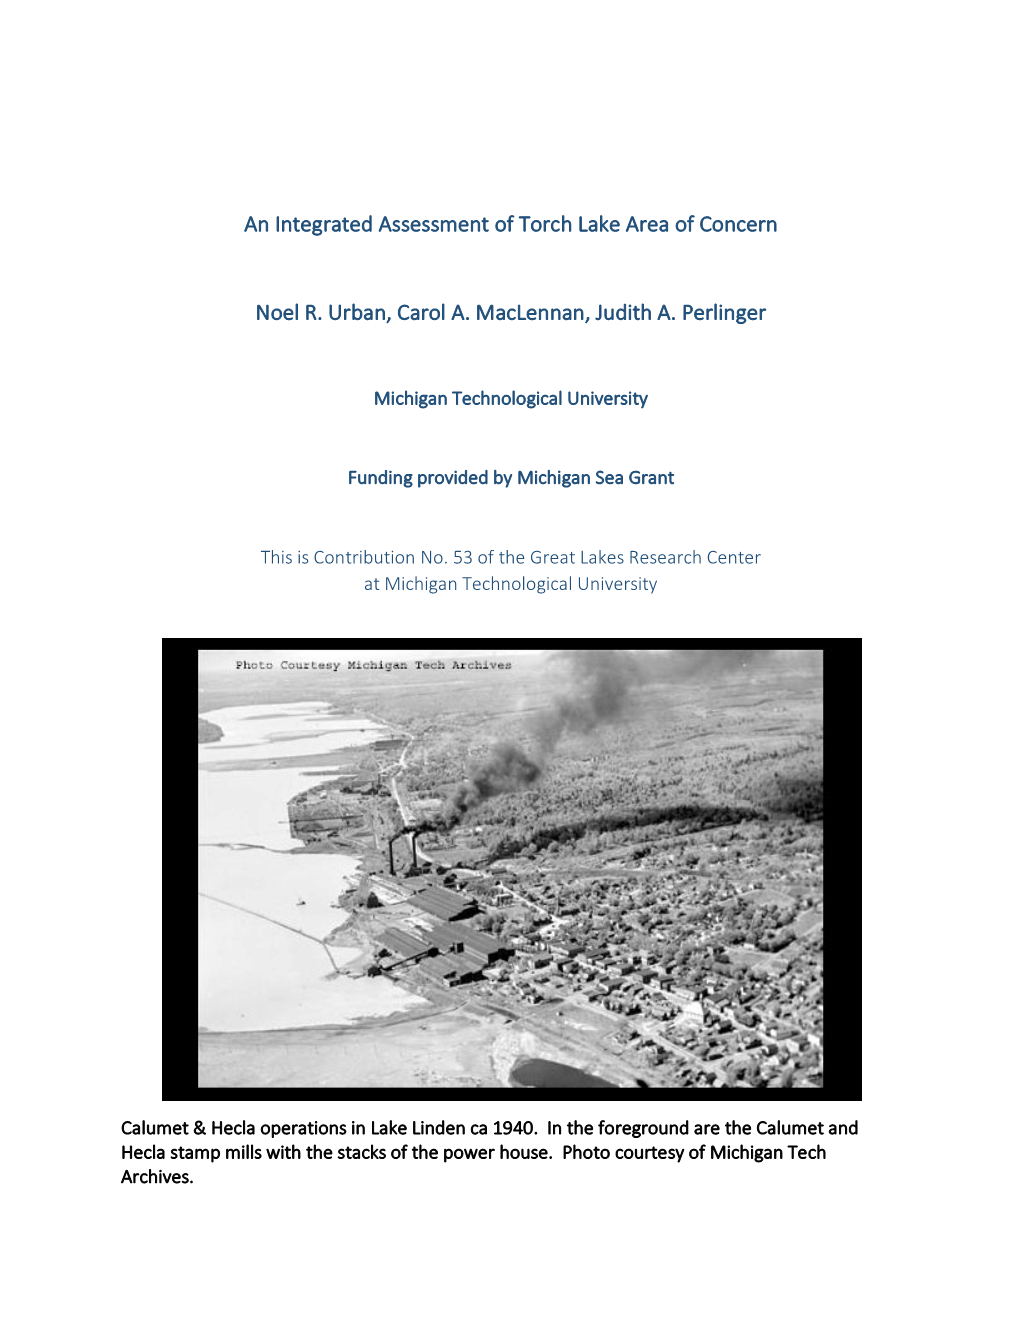 An Integrated Assessment of Torch Lake Area of Concern Noel R. Urban, Carol A. Maclennan, Judith A. Perlinger